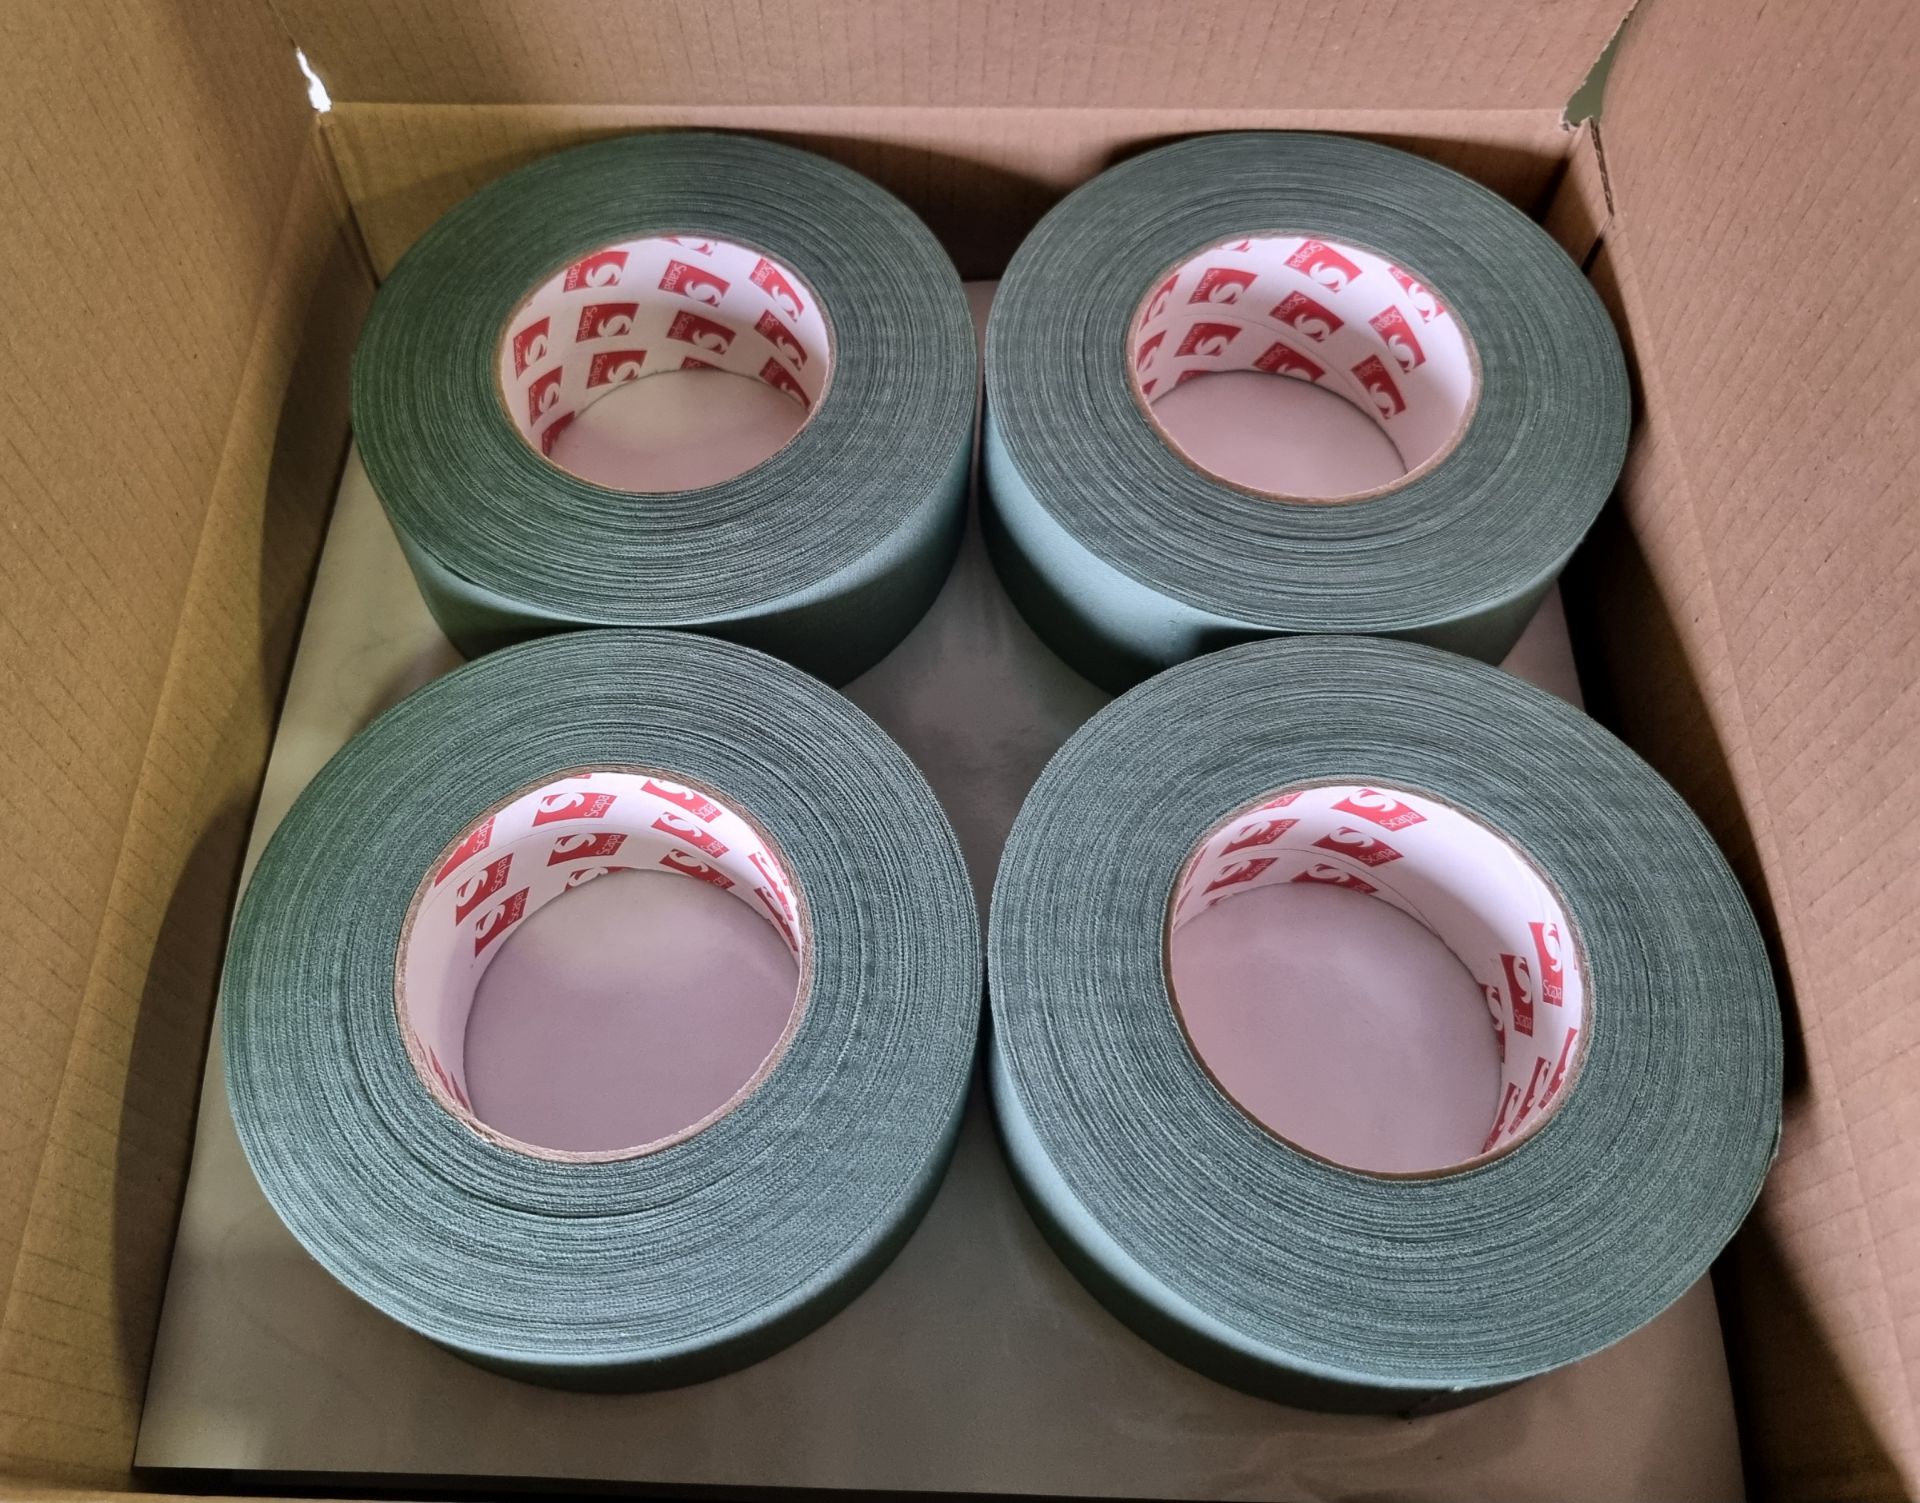 6x boxes of Scapa 3302 uncoated cotton cloth adhesive tape - olive green - 50mm x 50m - Image 3 of 4